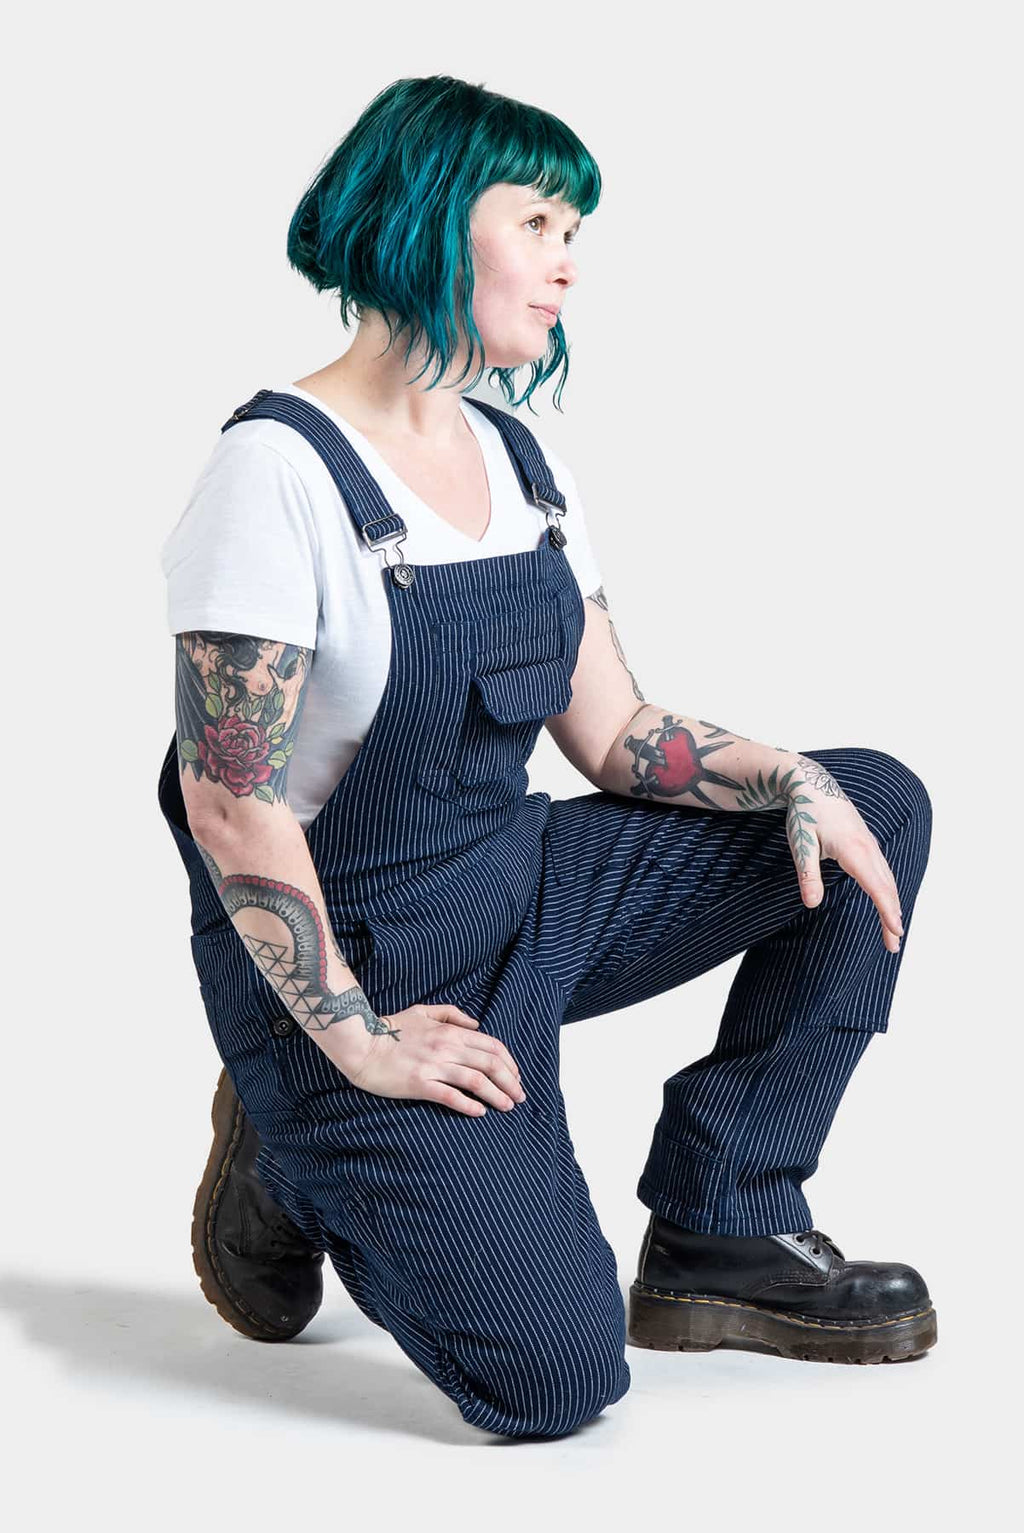 Freshley Overalls in Wabash Stripe Work Pants Dovetail Workwear